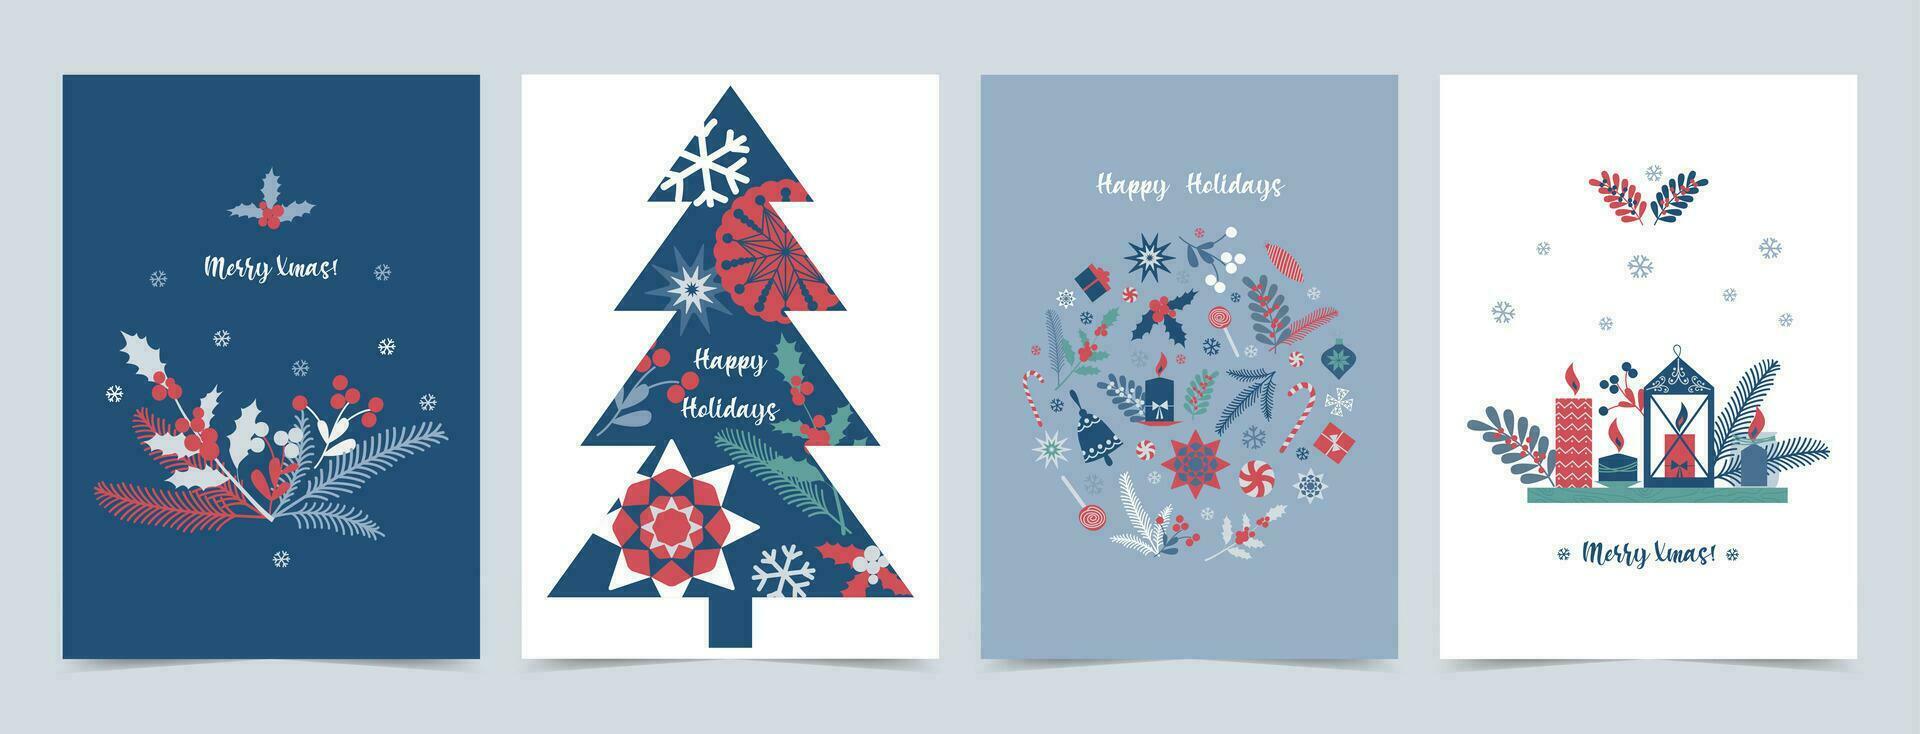 Set of greeting cards, holiday covers for winter holidays. Mistletoe branches, fir branches, Christmas trees, stars, snowflakes, candles, ornament, gifts. Vertical arrangement. vector